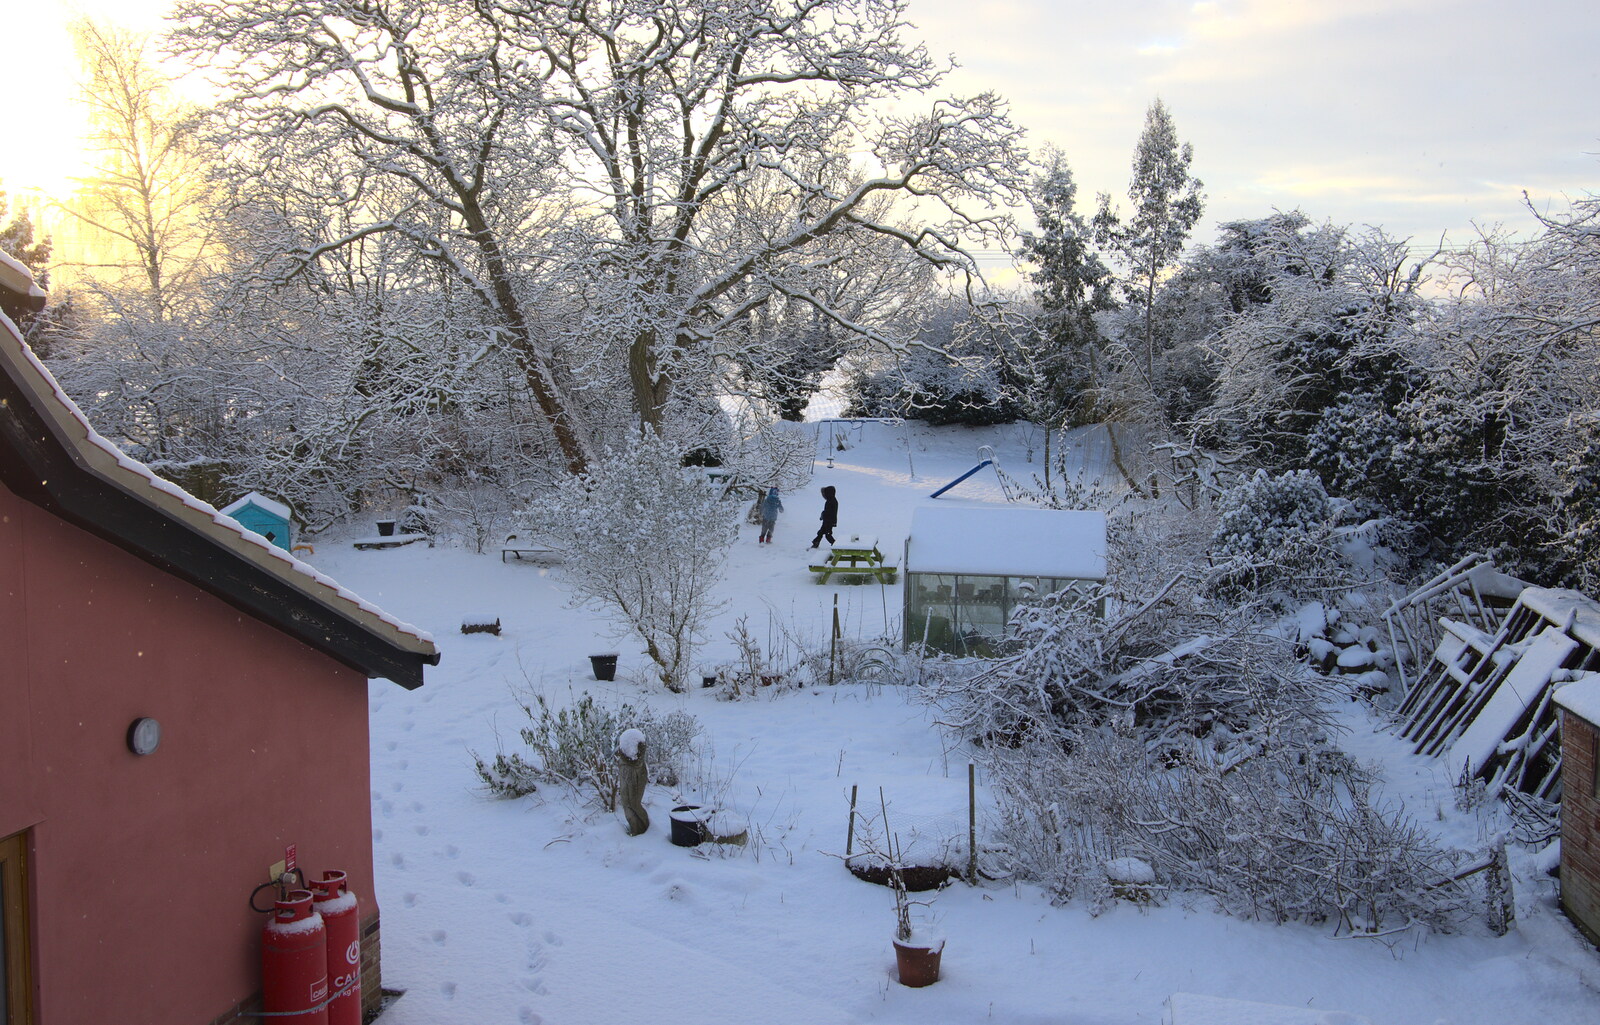 The boys are in the garden from Snowmageddon: The Beast From the East, Suffolk and London - 27th February 2018